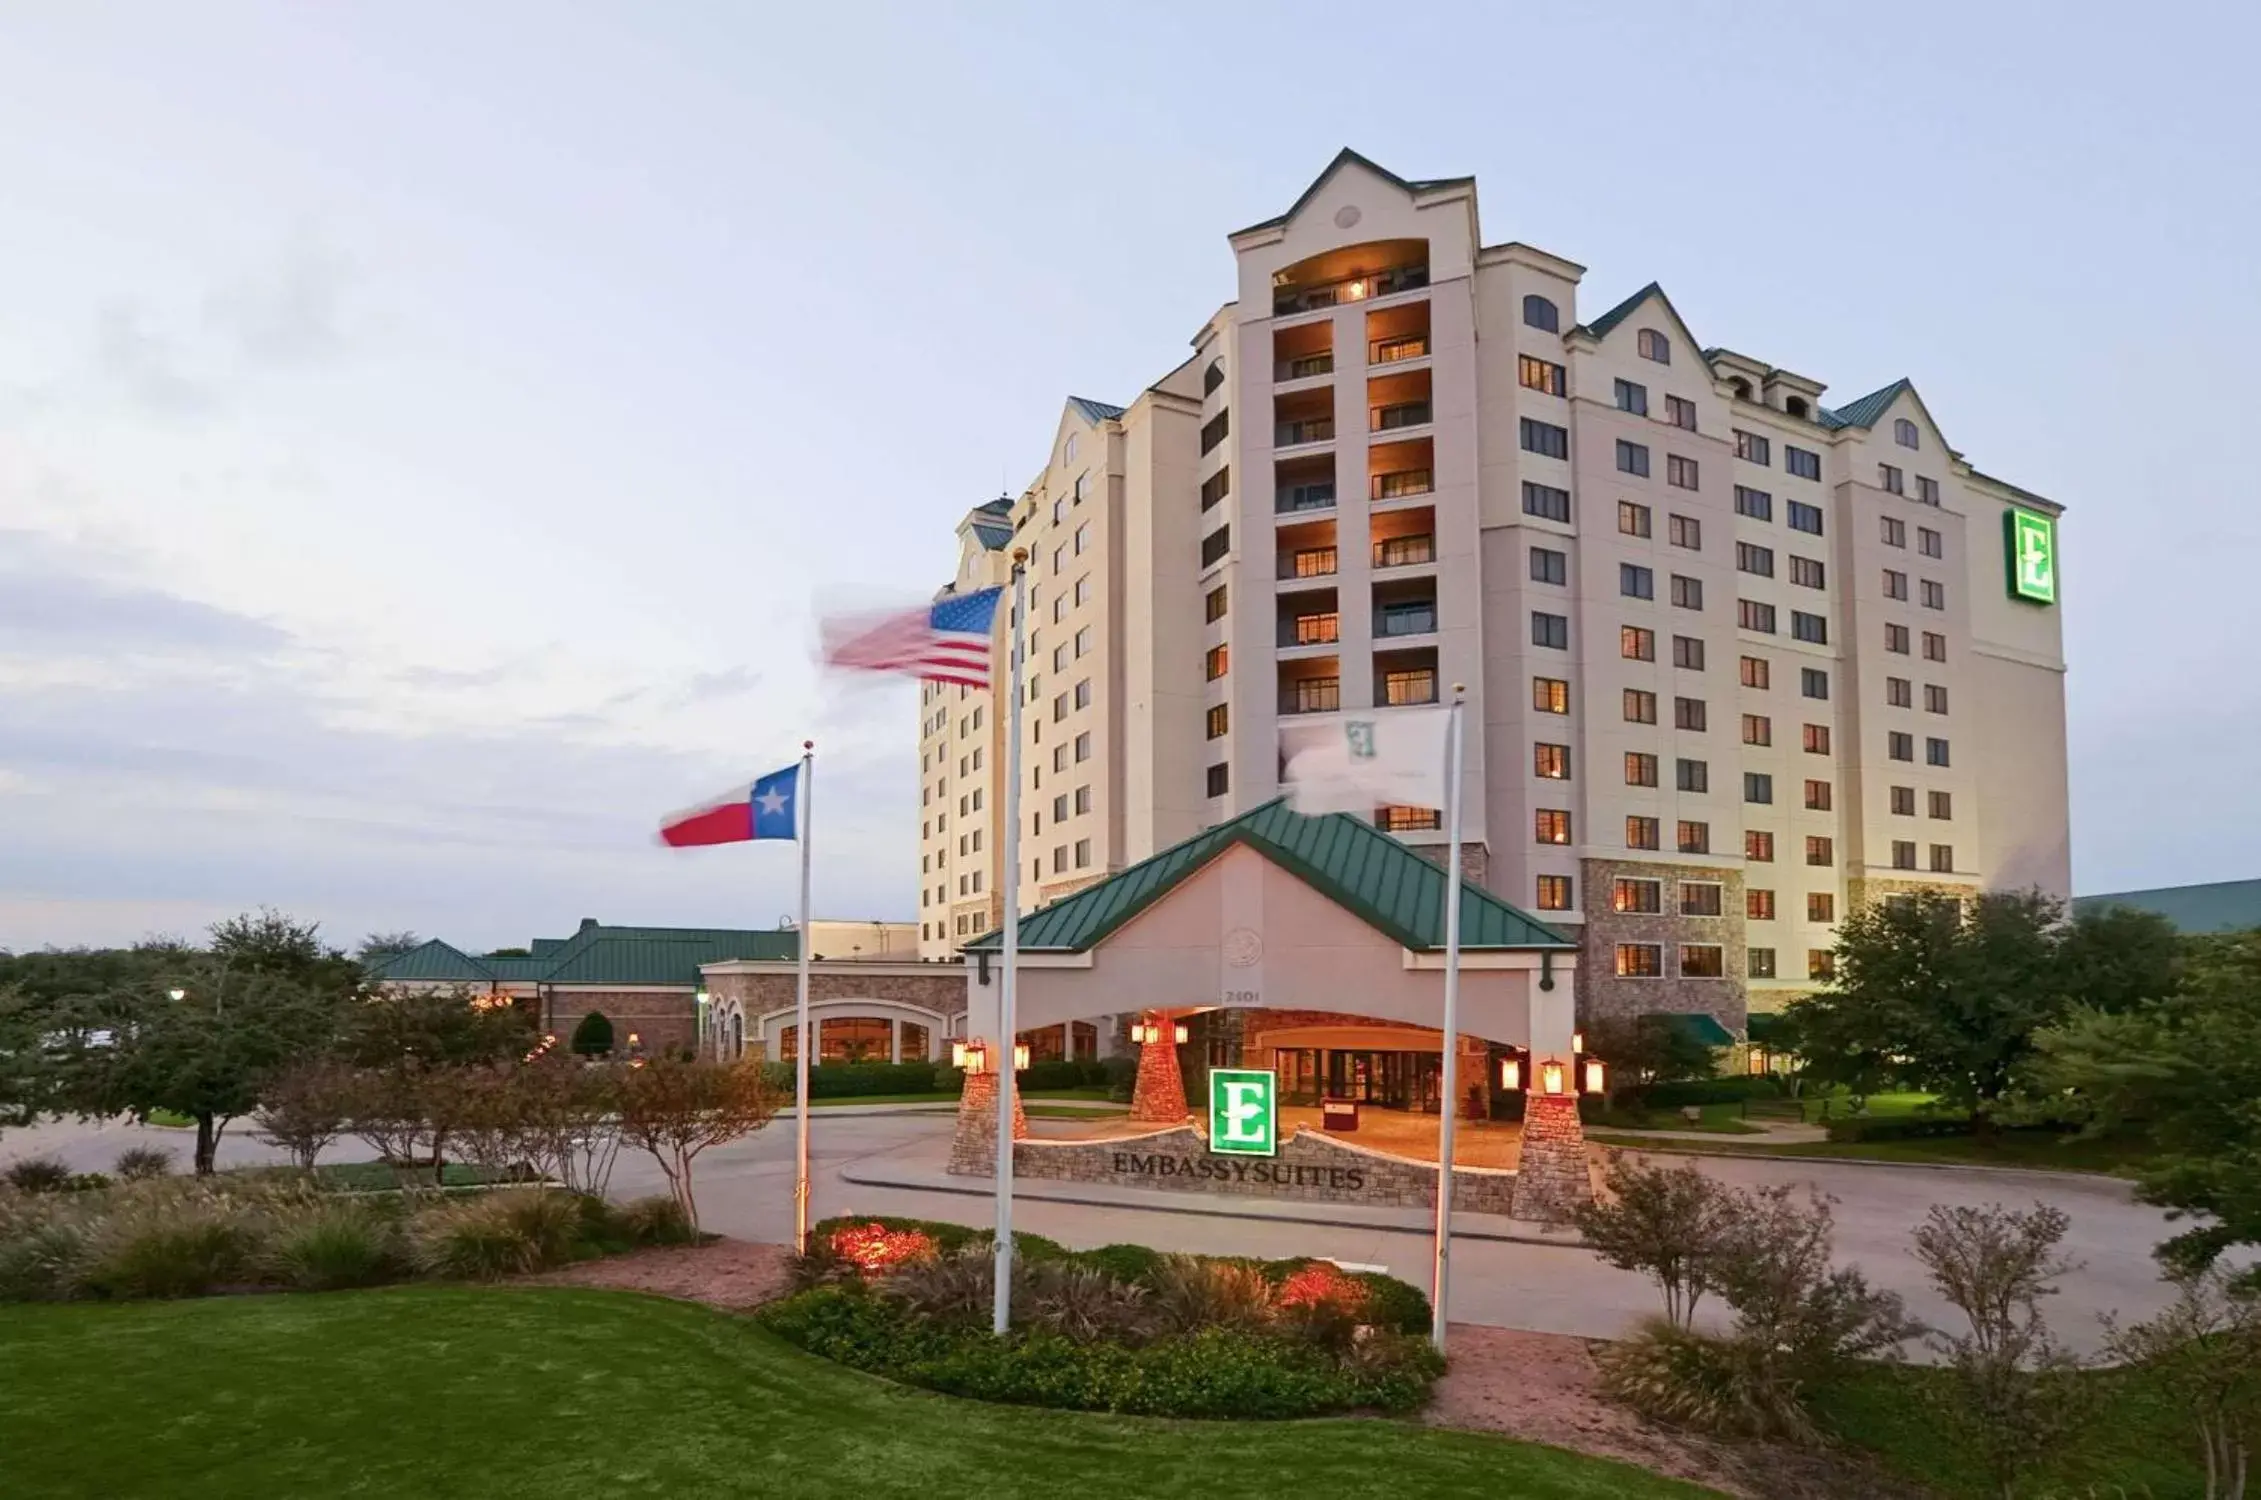 Property Building in Embassy Suites Dallas - DFW Airport North